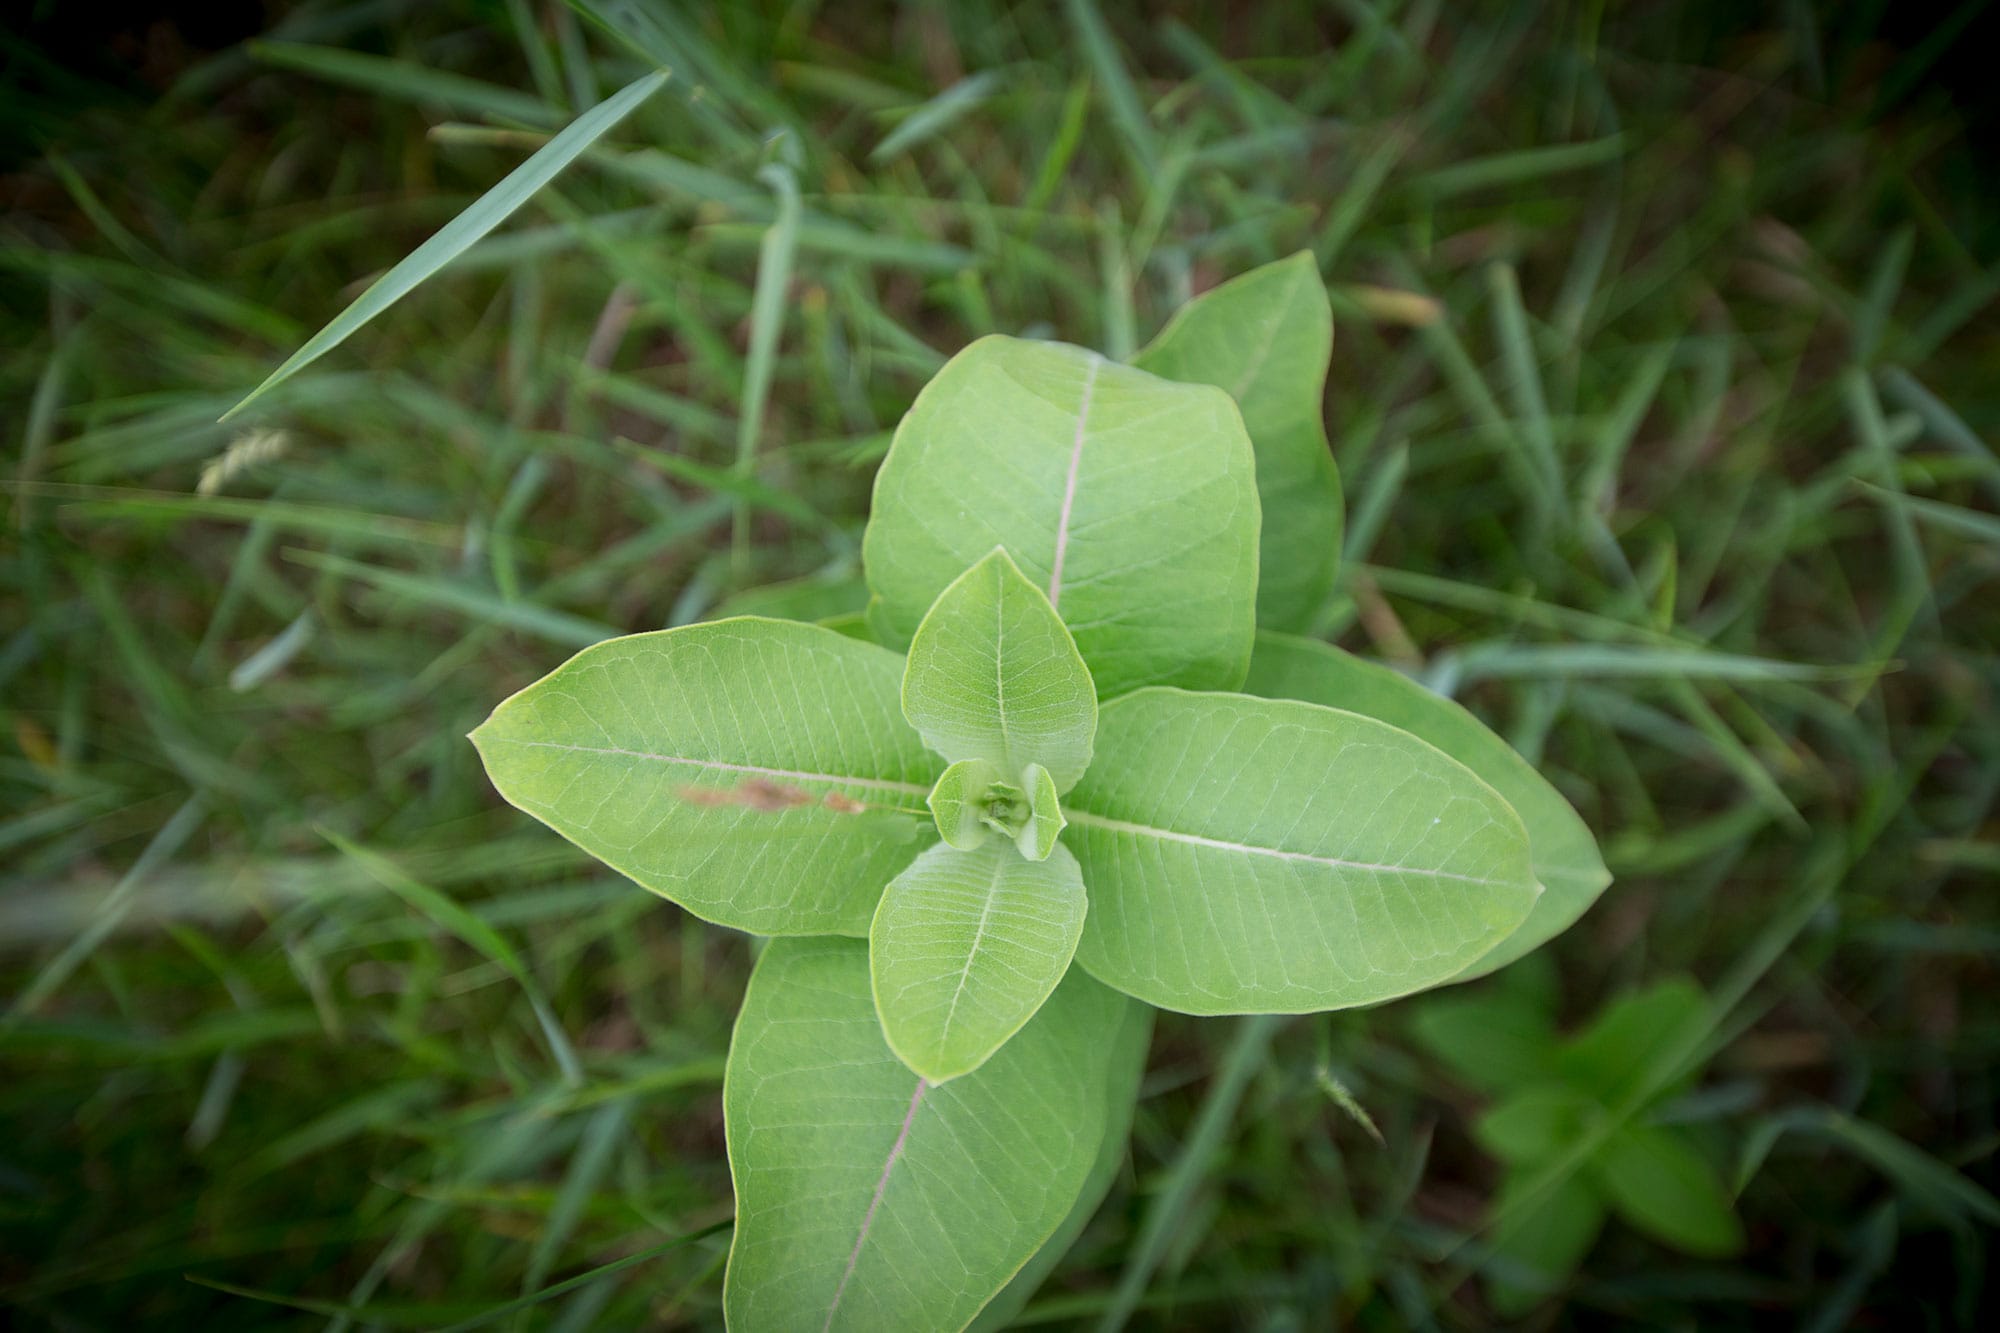 A small green plant growing in the grass.